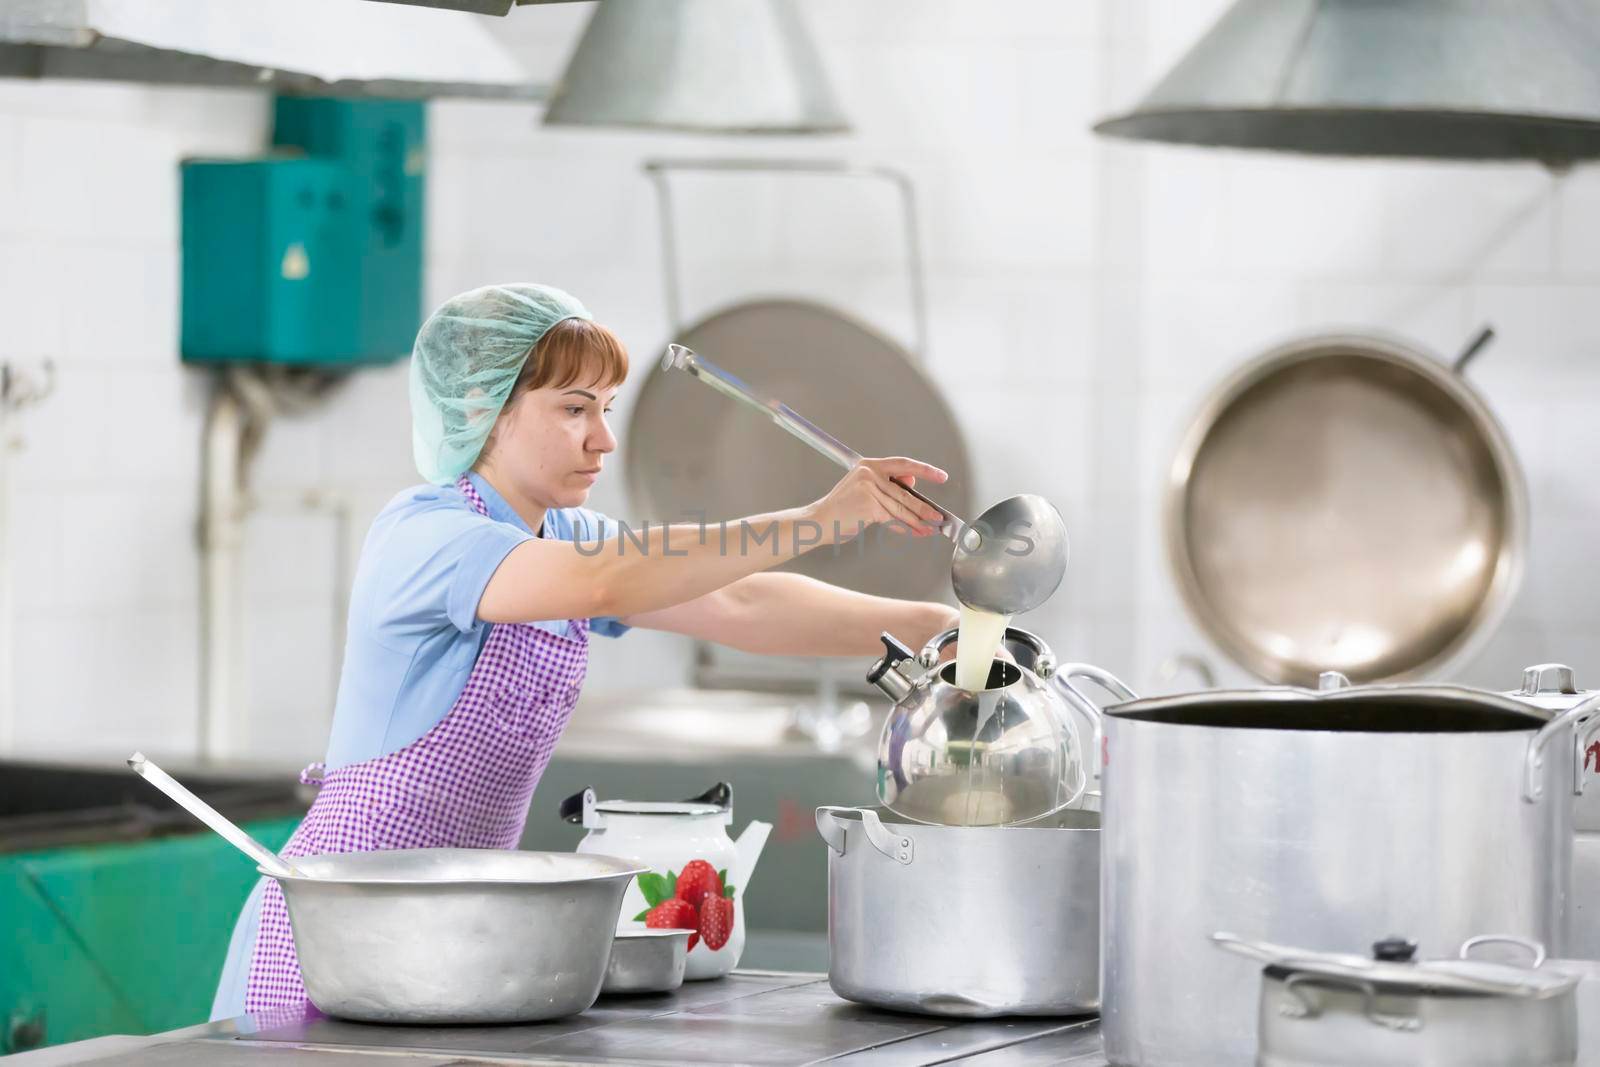 Cook prepares food. Cook with large pans and a ladle. Kitchen worker with a ladle. Chef professional